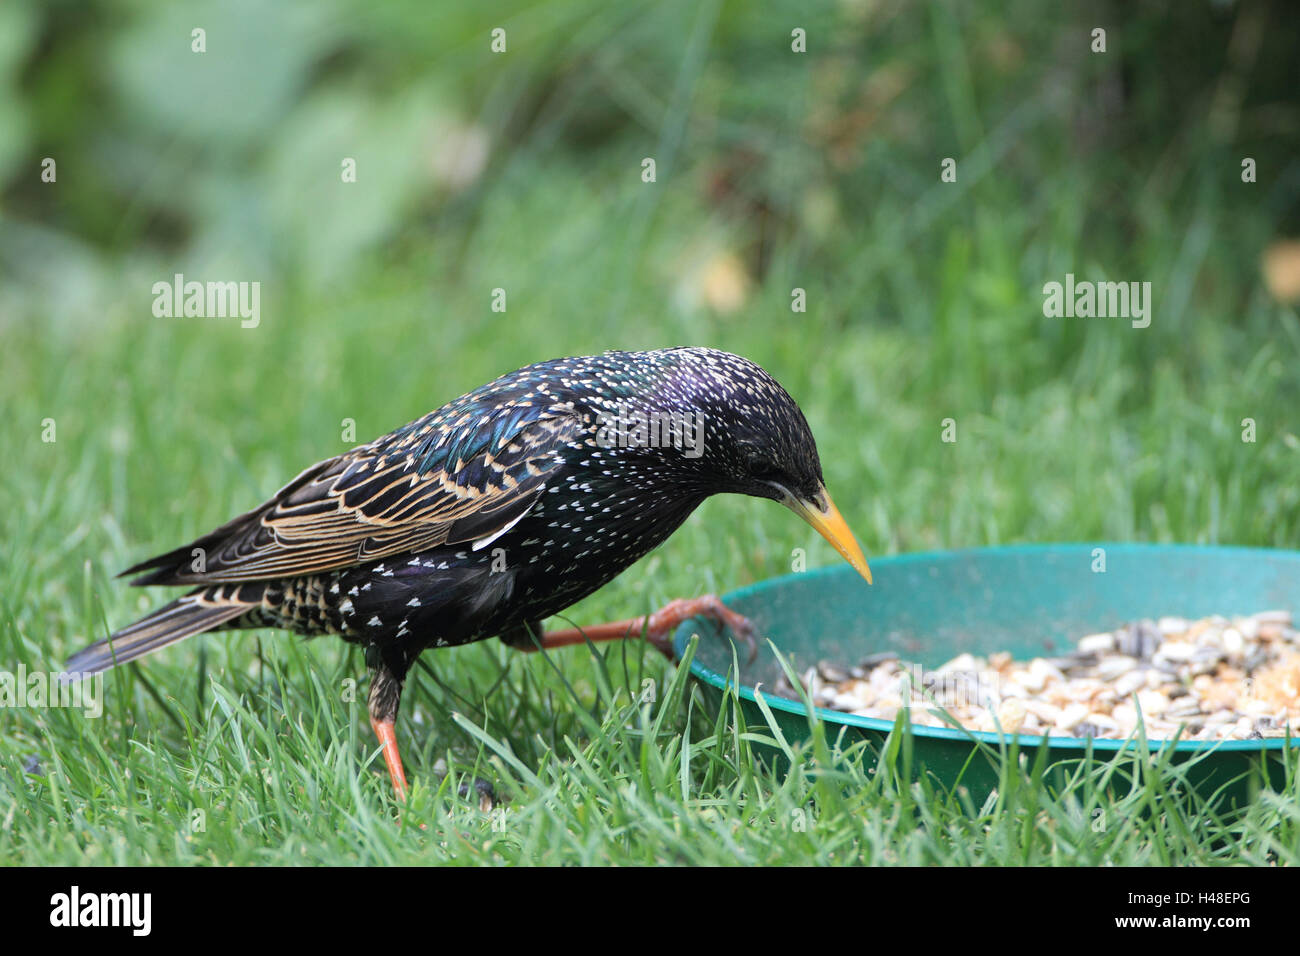 Starling on the feeding ground, Germany, feed, bird, wild animal, animal, eat, Starling, bird table, side view, birdseed, close-up, Stock Photo